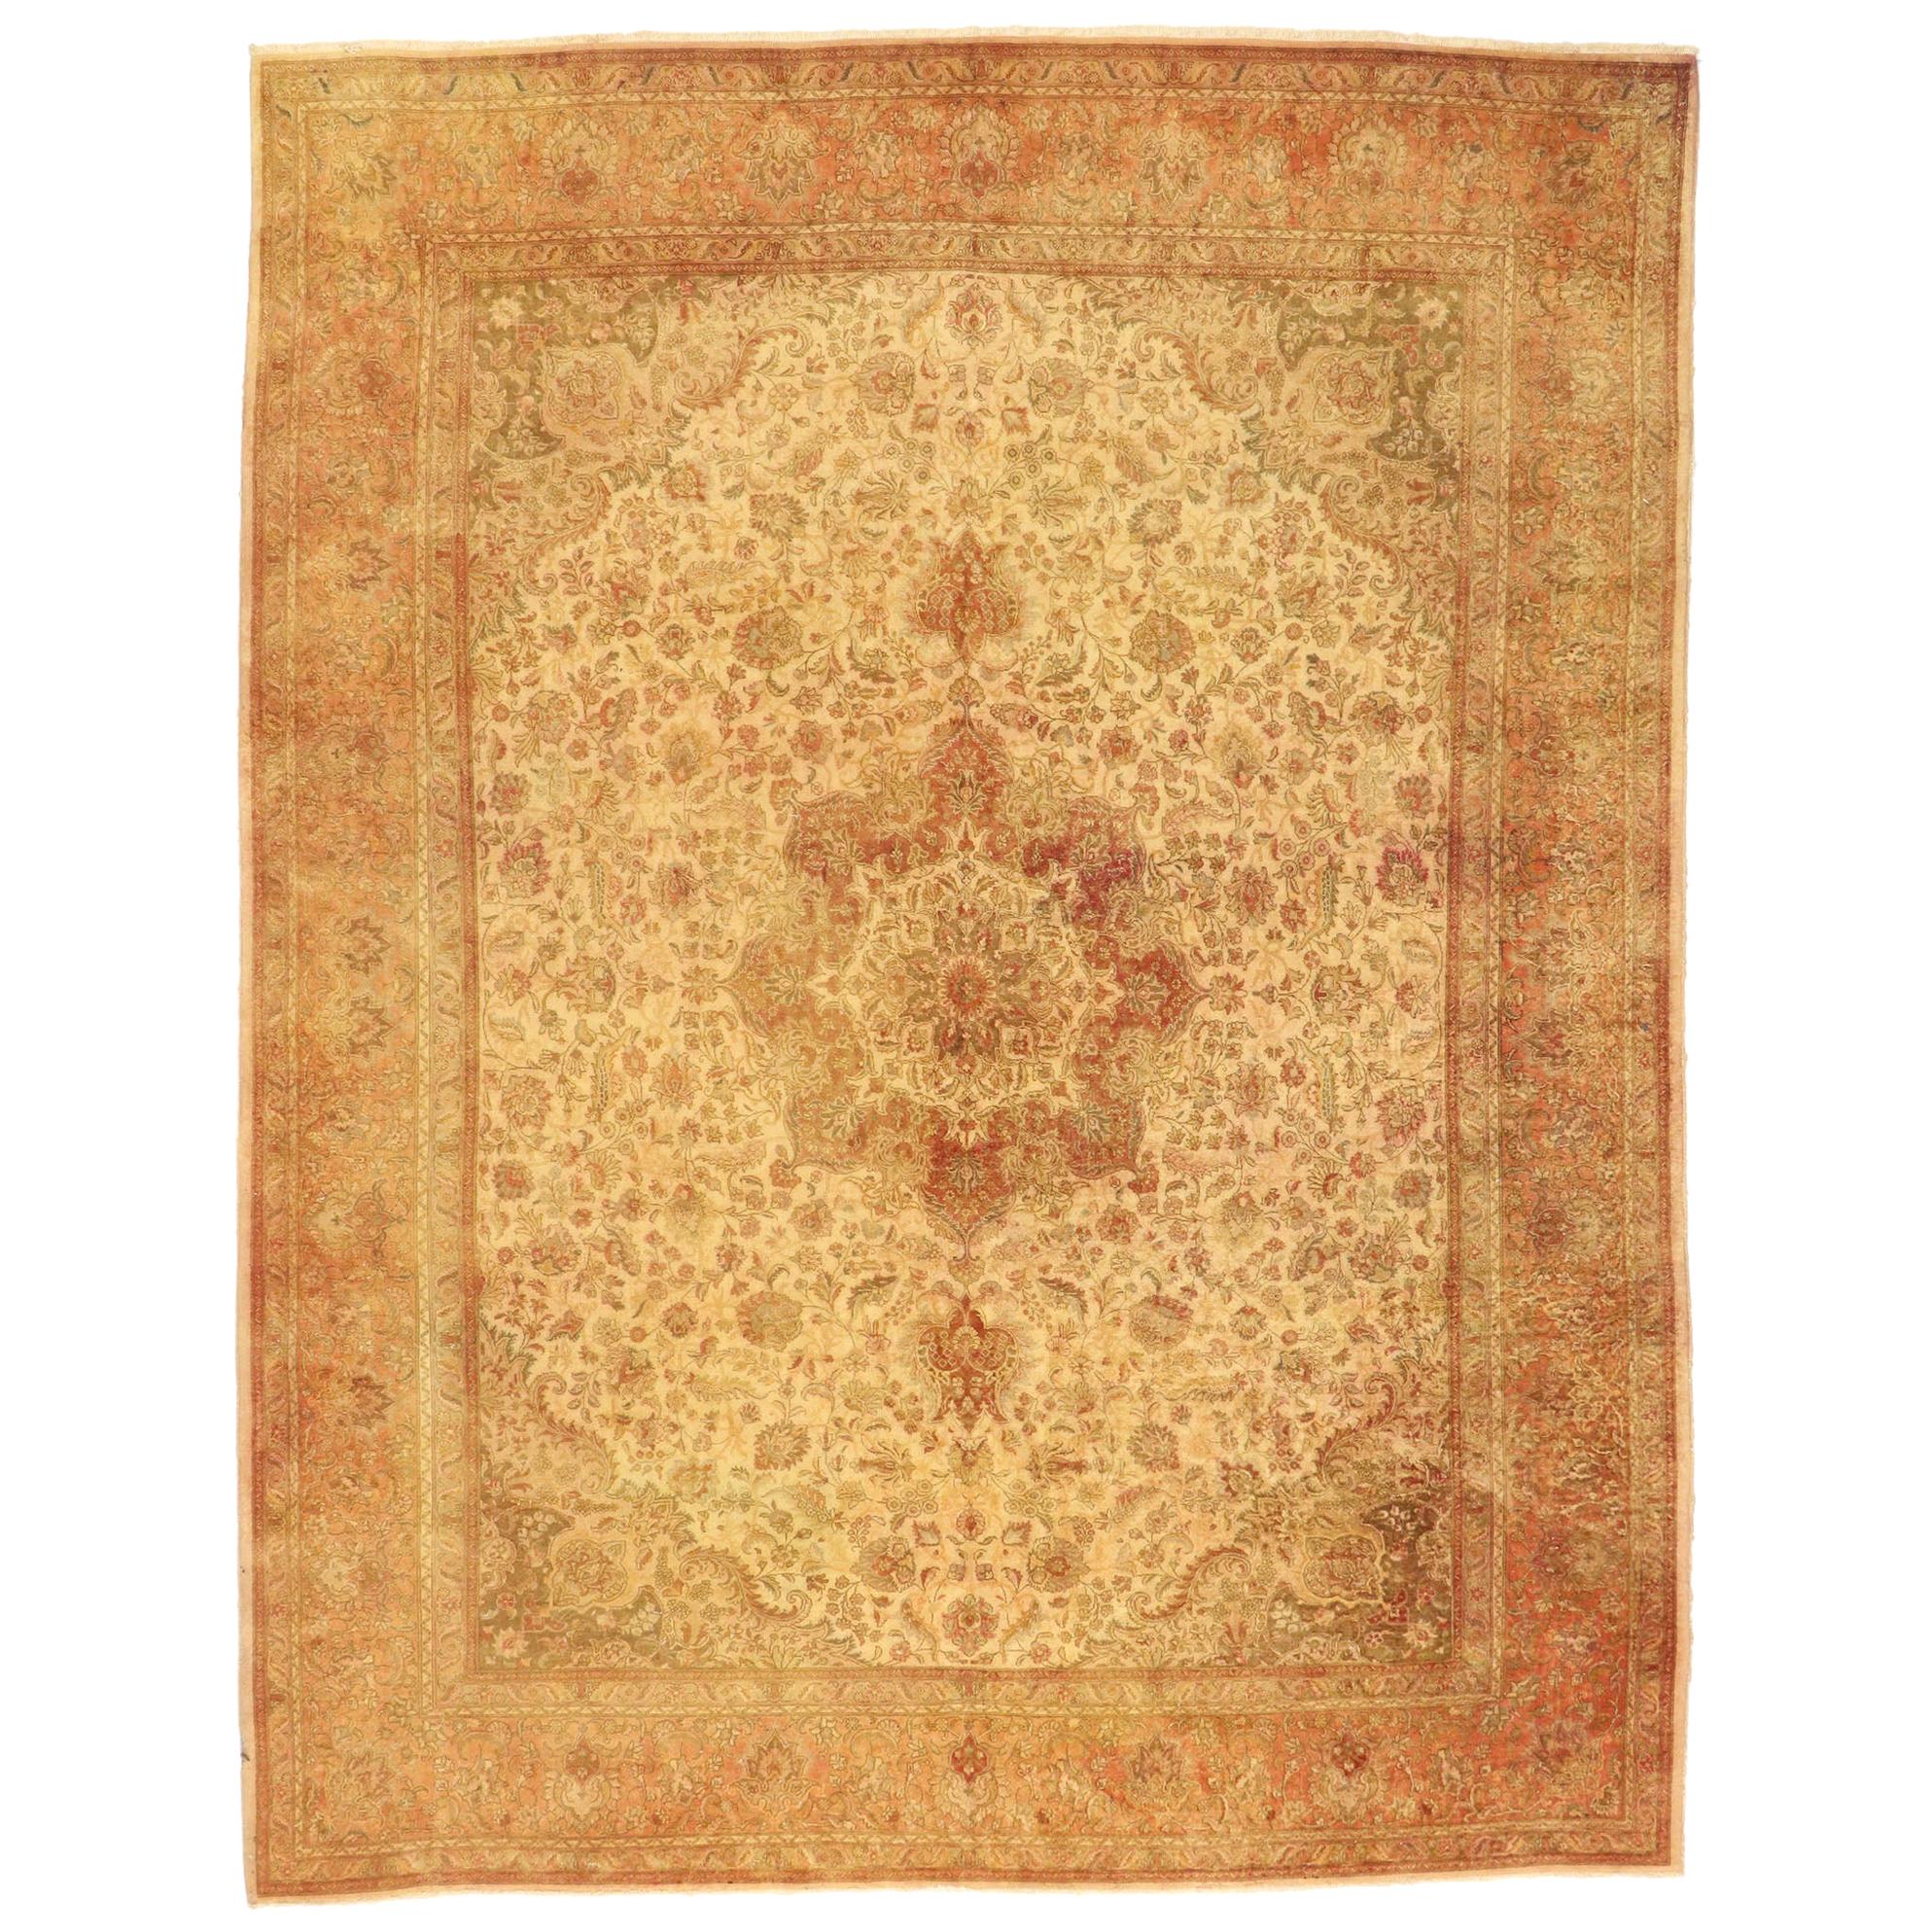 Vintage Persian Tabriz Rug with Rustic Mediterranean Tuscan Style For Sale